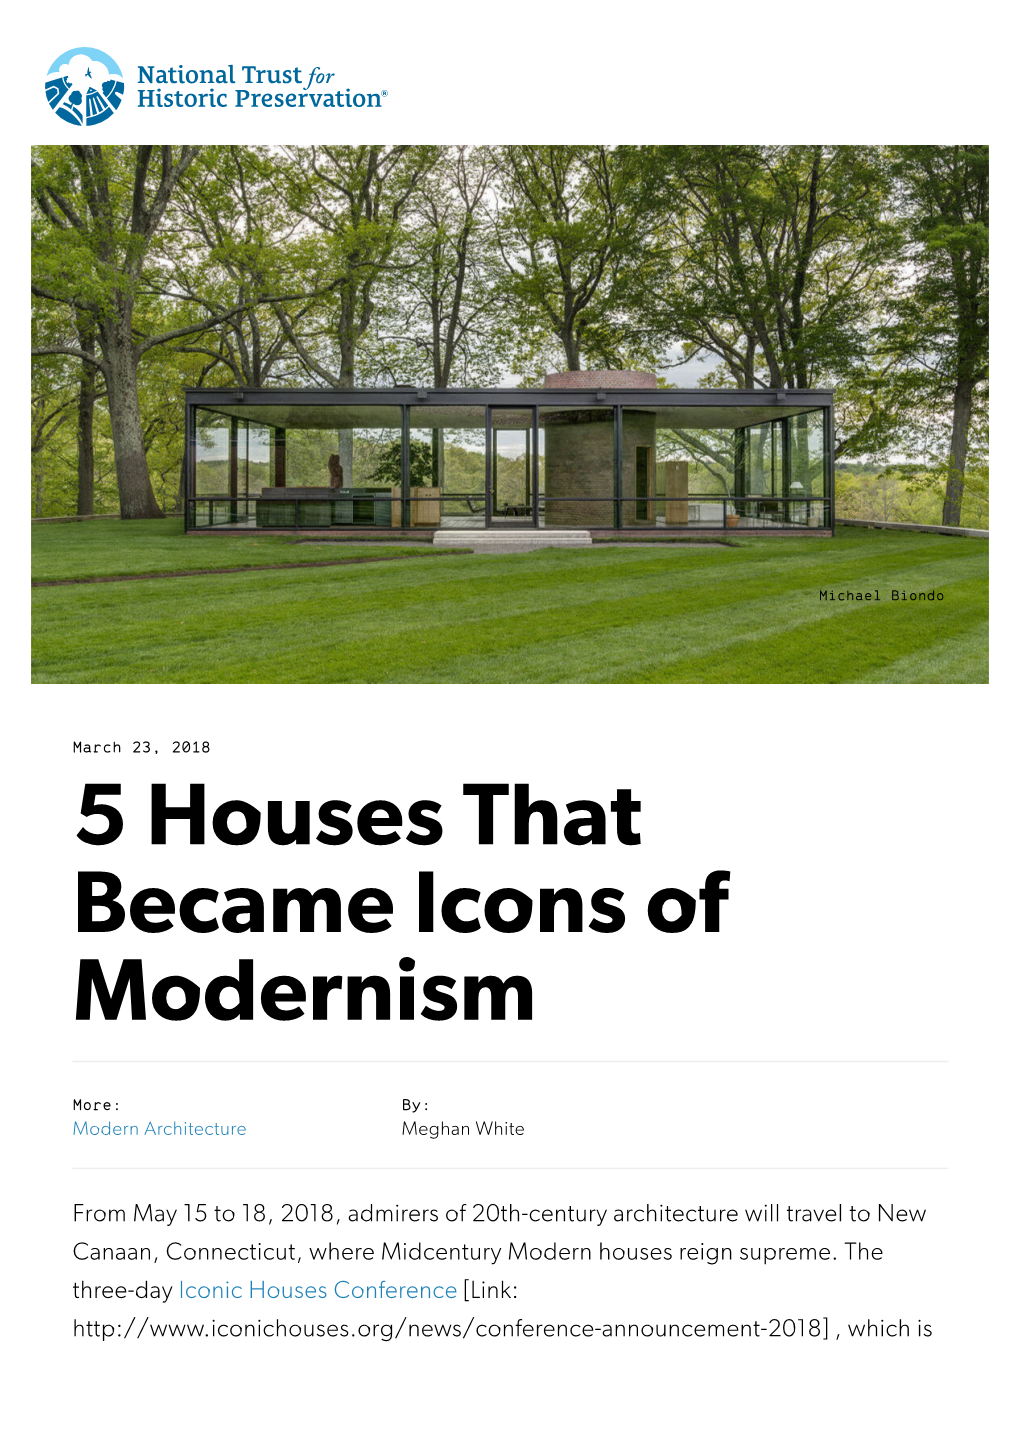 5 Houses That Became Icons of Modernism | National Trust For